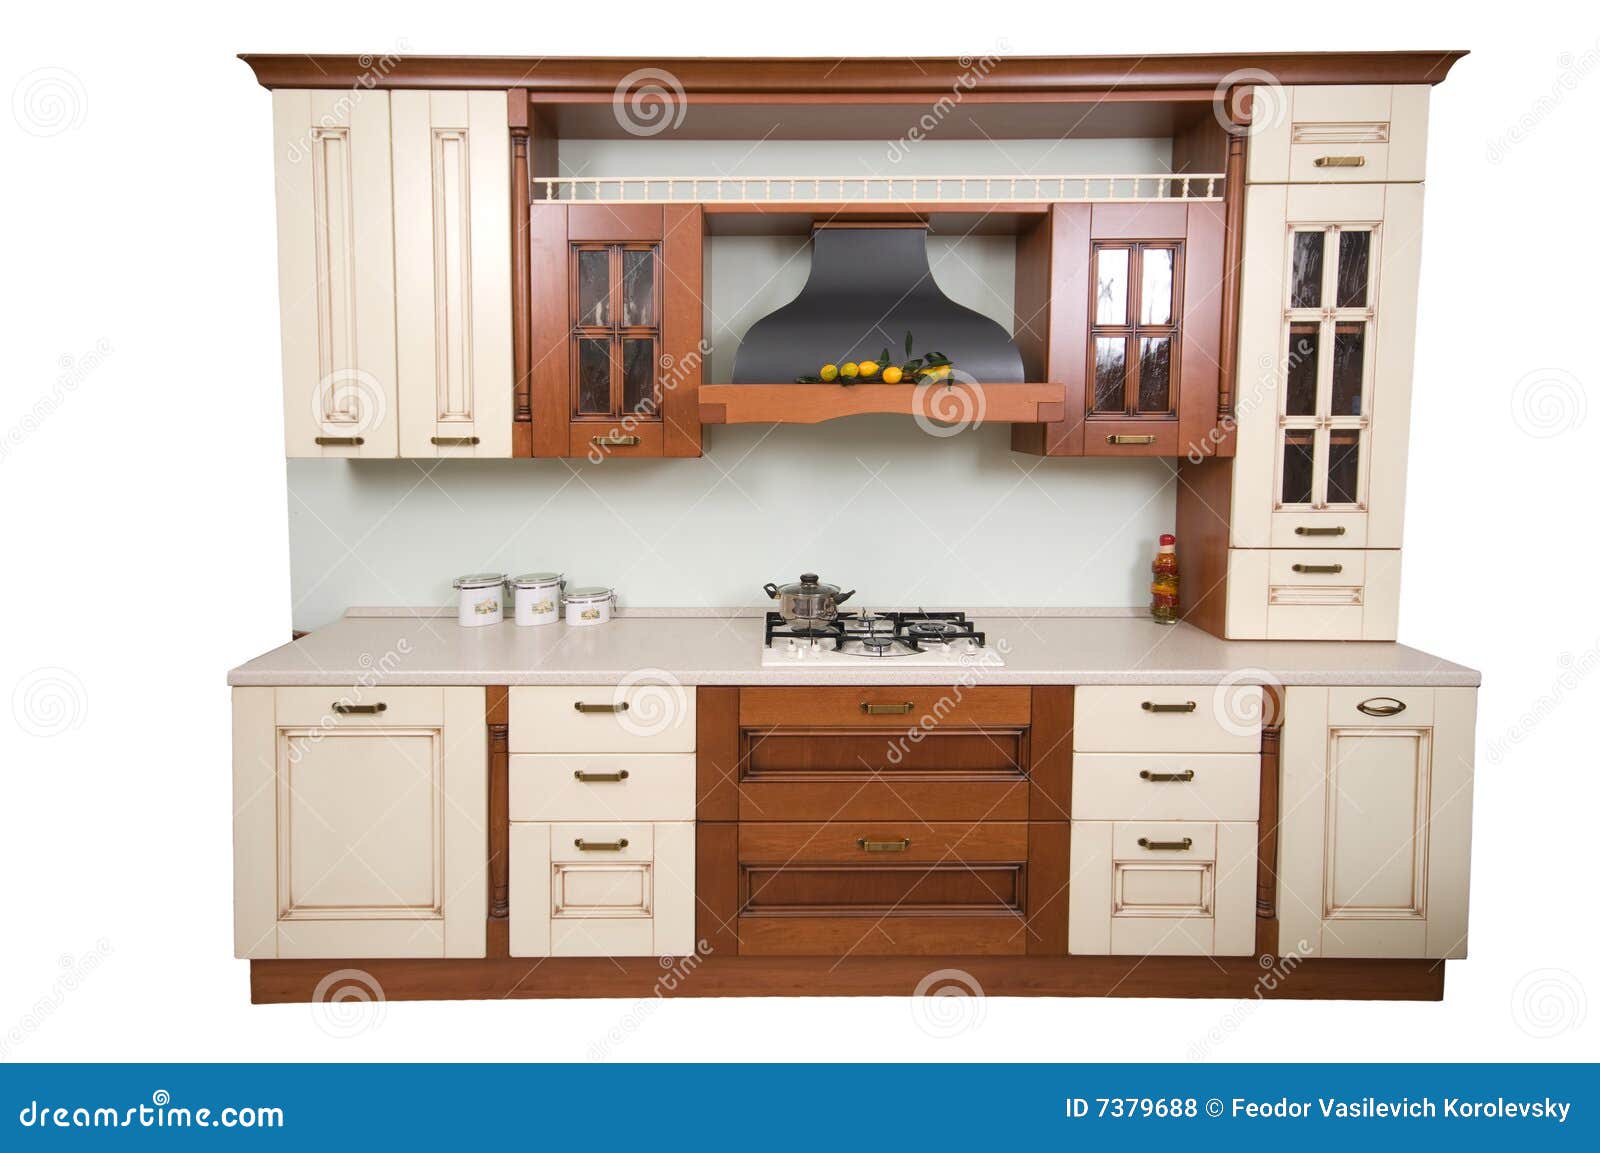 home cookery furniture.